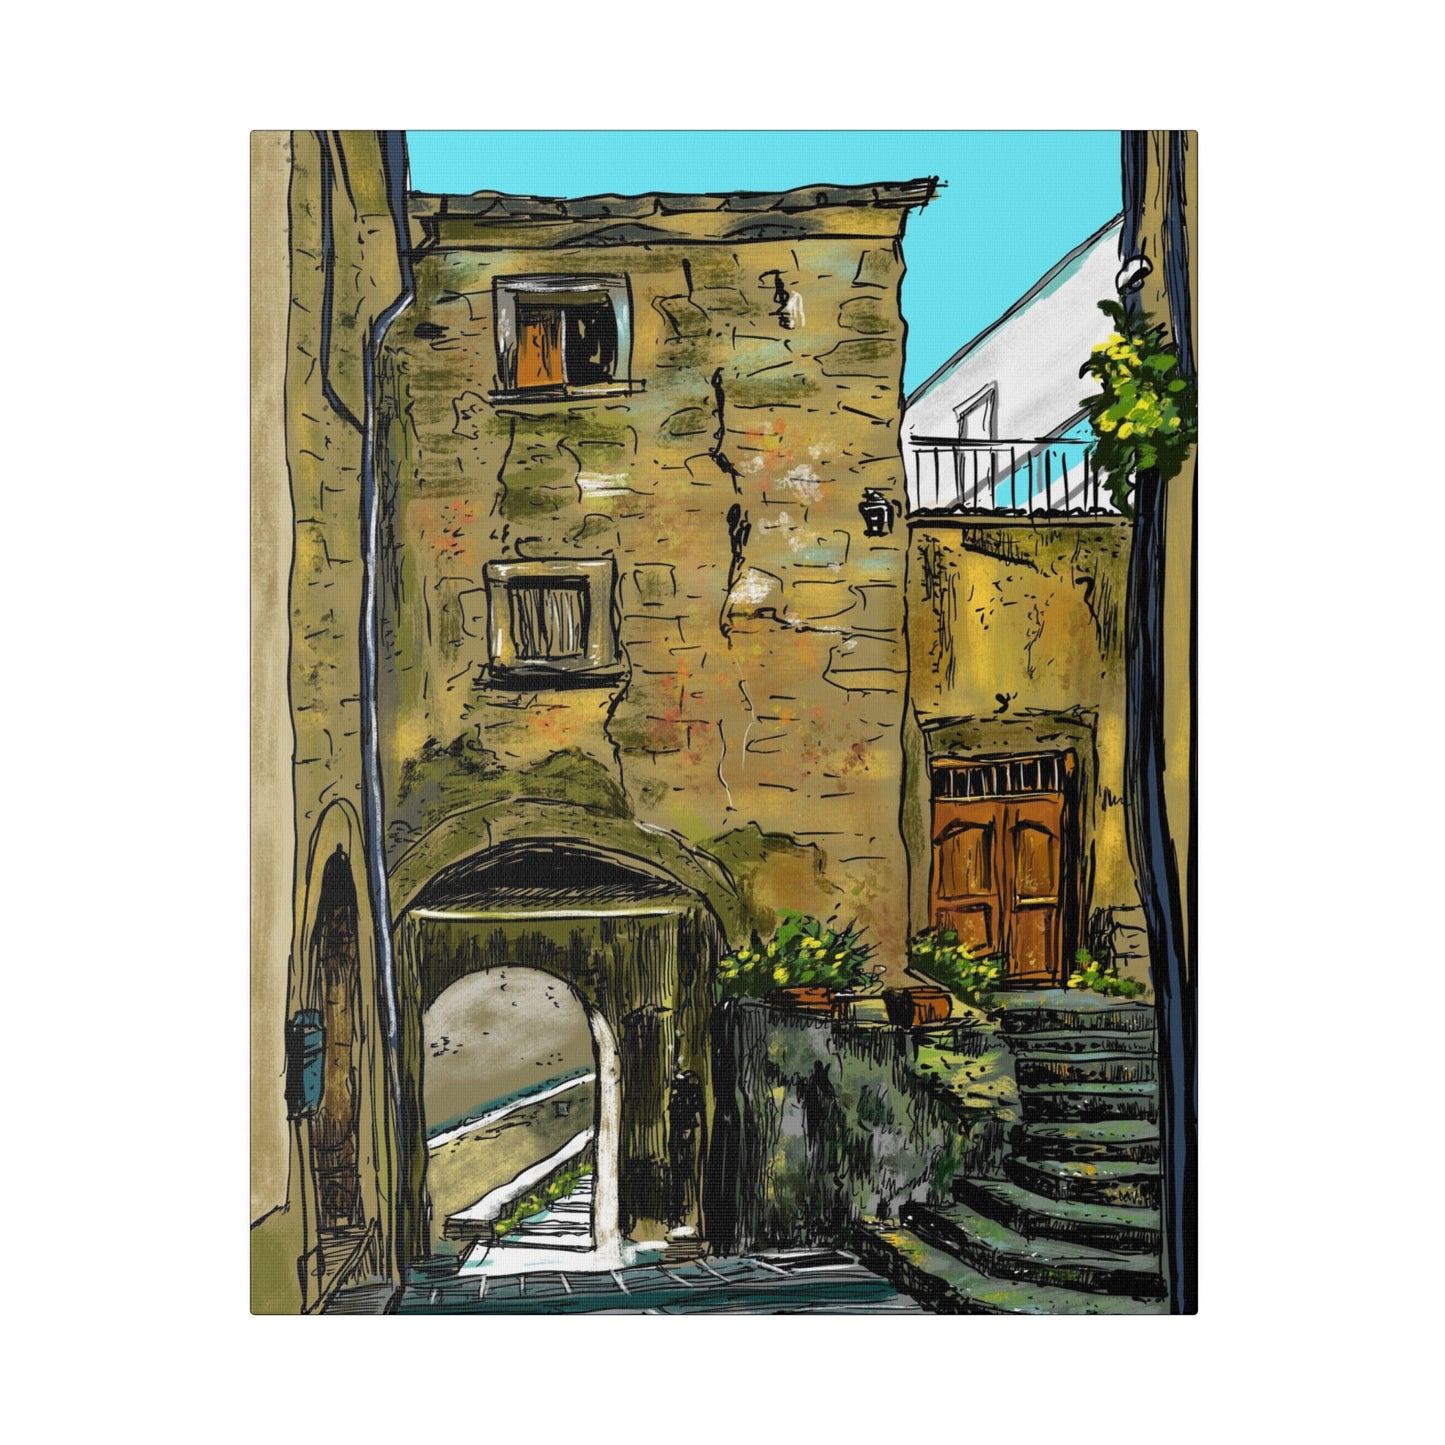 A Street in Bomba, Italy - Canvas Print